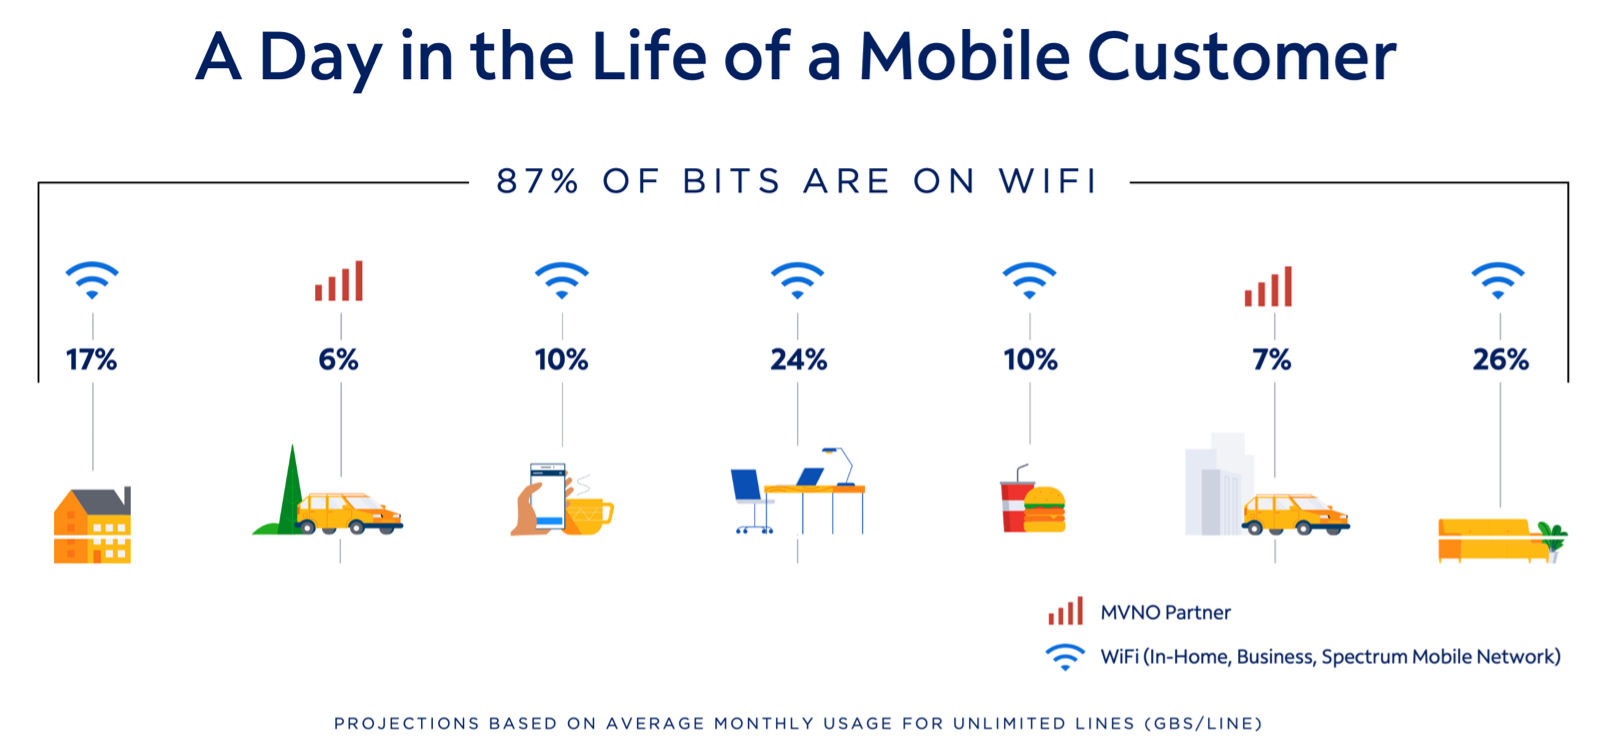 A Day in the Life of a Mobile Customer